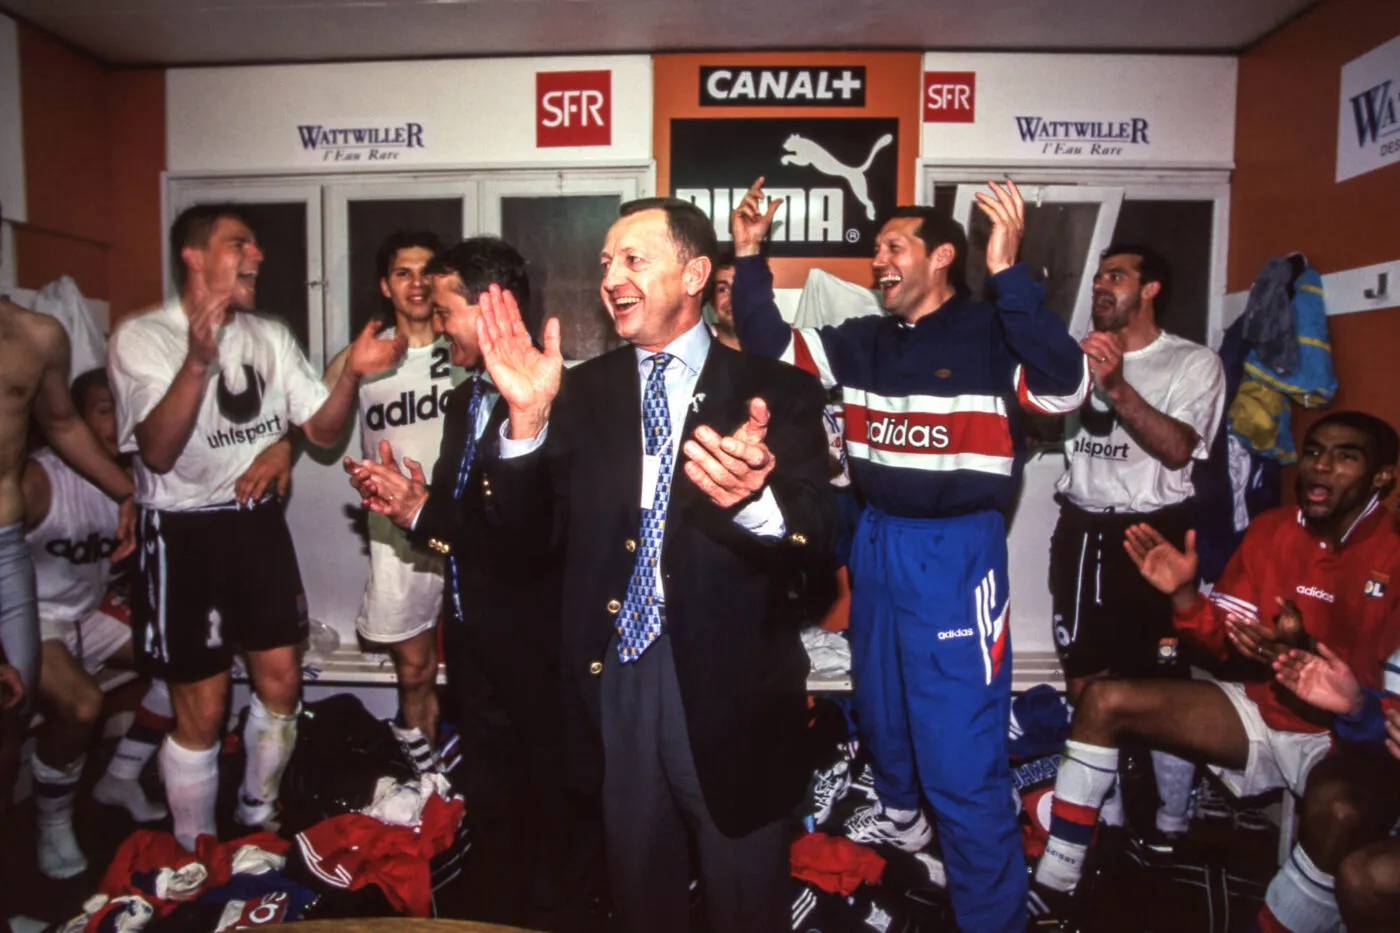 Bernard Lacombe head coach and Jean-Michel Aulas president of Lyon celebrate the qualification in UEFA Cup during the Division 1 match between FC Metz and Olympique Lyonnais, at Stade Saint Symphorien, Metz, France on 09th May 1998 ( Photo by Alain Gadoffre / Onze / Icon Sport )